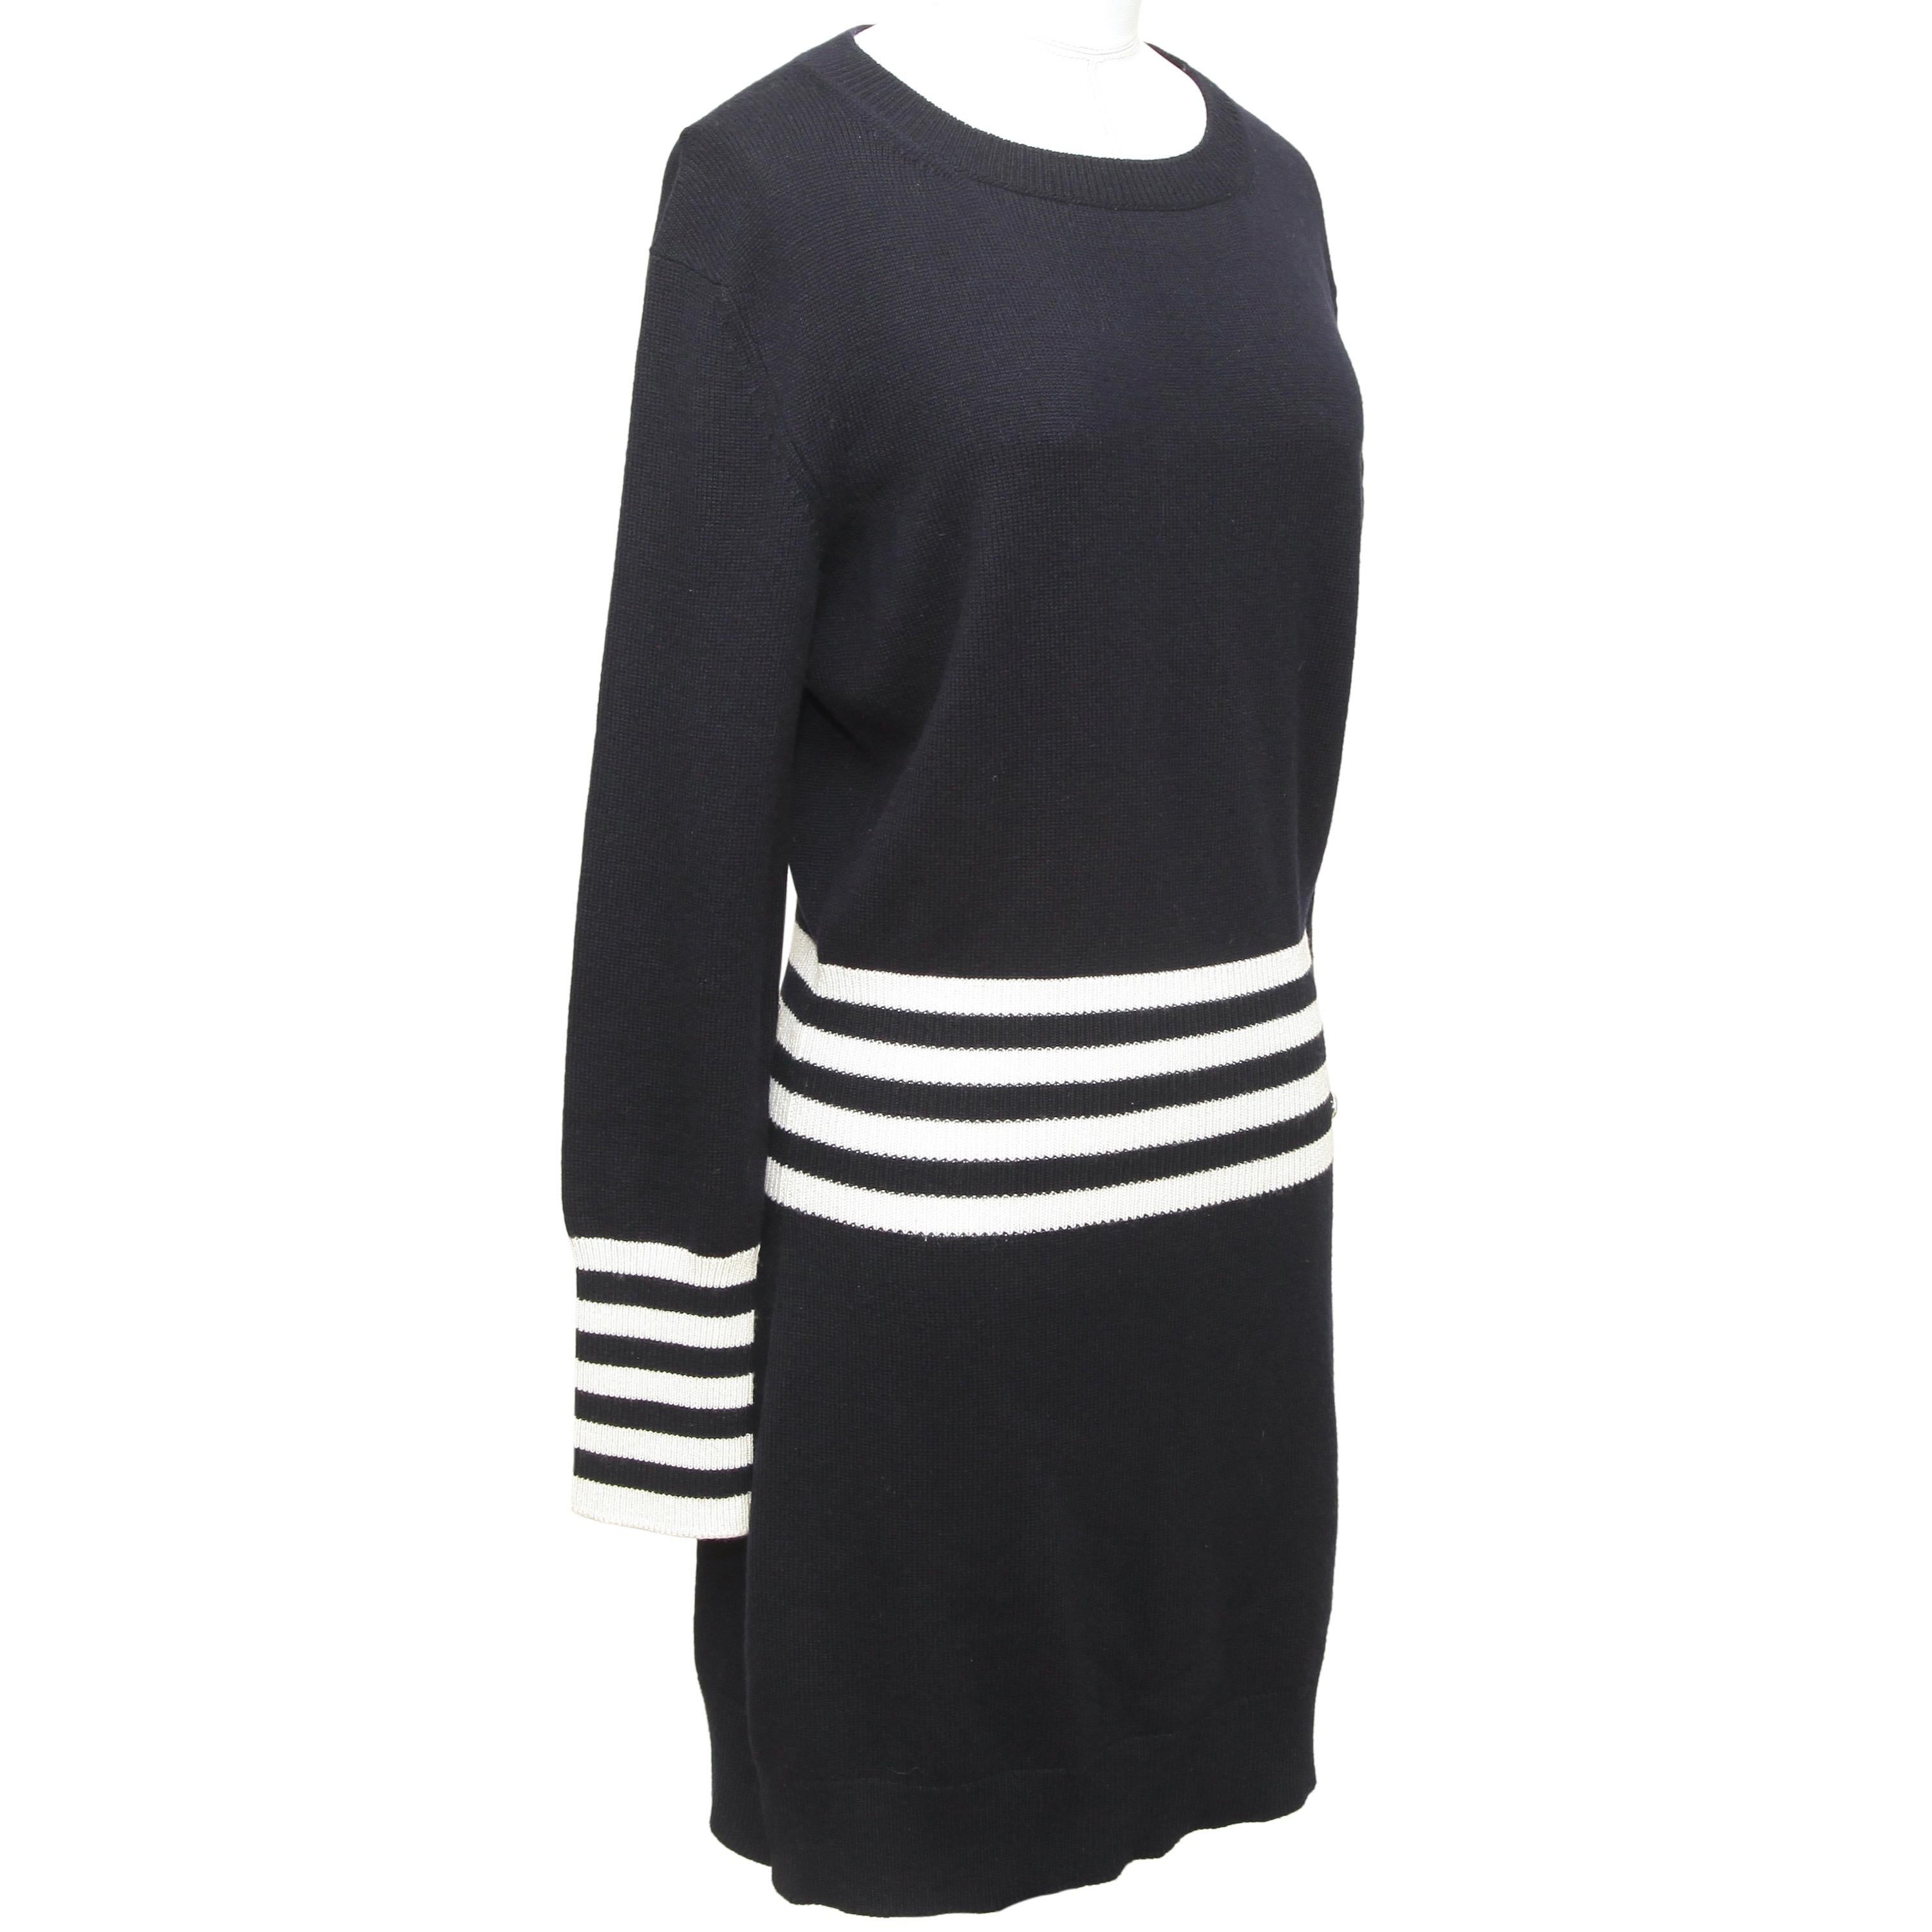 GUARANTEED AUTHENTIC CHANEL 2016 NAVY STRIPED CASHMERE SWEATER TUNIC DRESS

Retailed excluding sales taxes $3,350

Design:
- Navy long sleeve sweater tunic dress.
- Stripes at waist and arms.
- Crew neck.
- CC plaque at left hip.
- Comes with extra